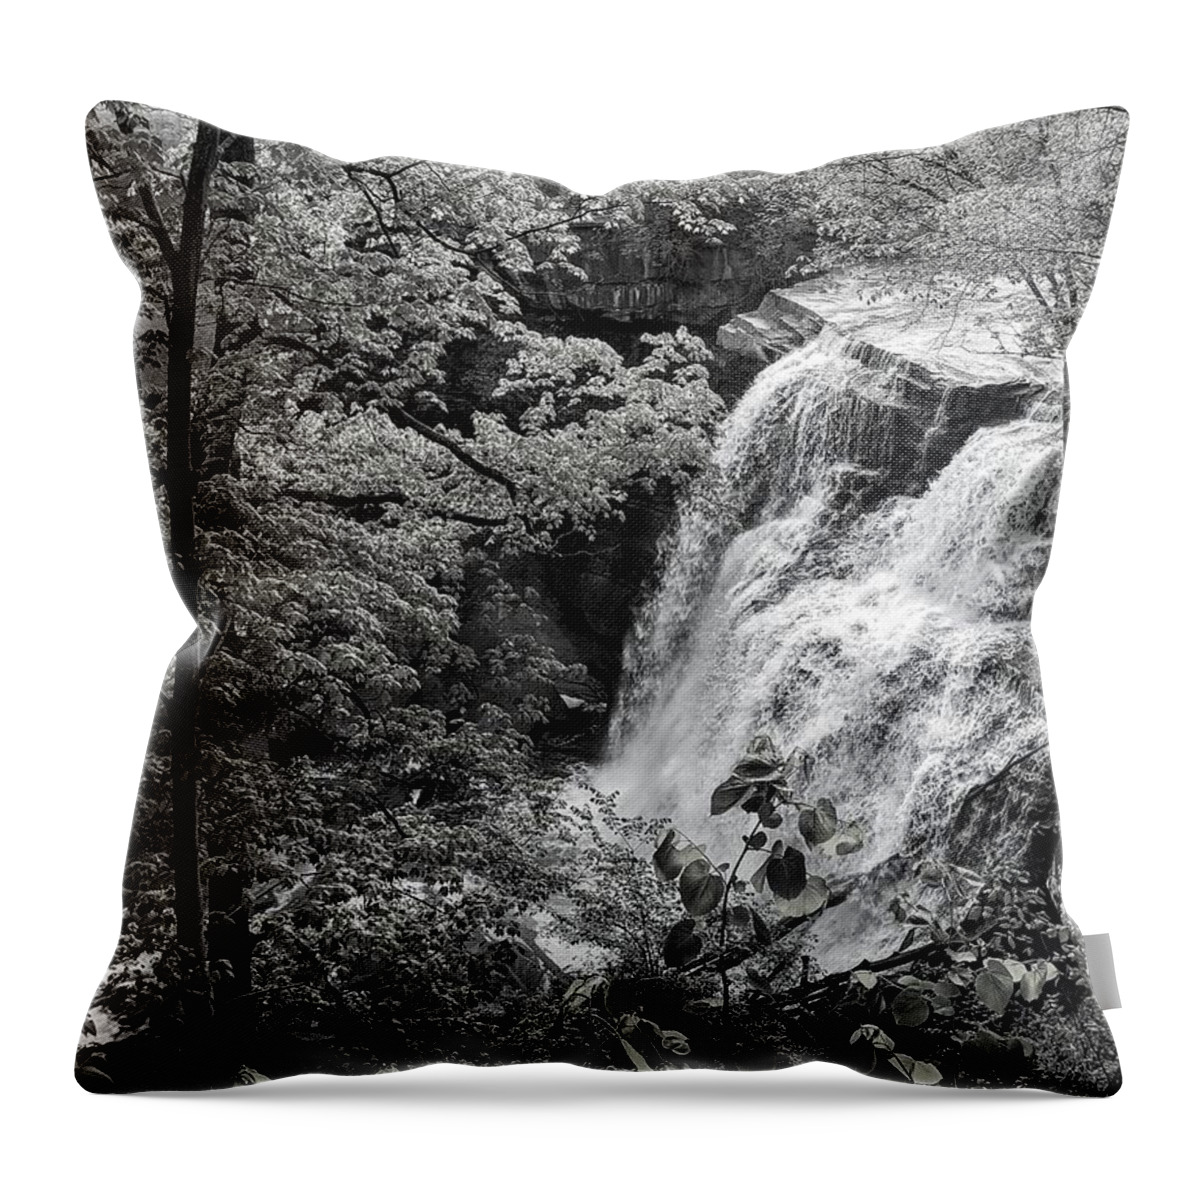  Throw Pillow featuring the photograph Brandywine Falls by Brad Nellis